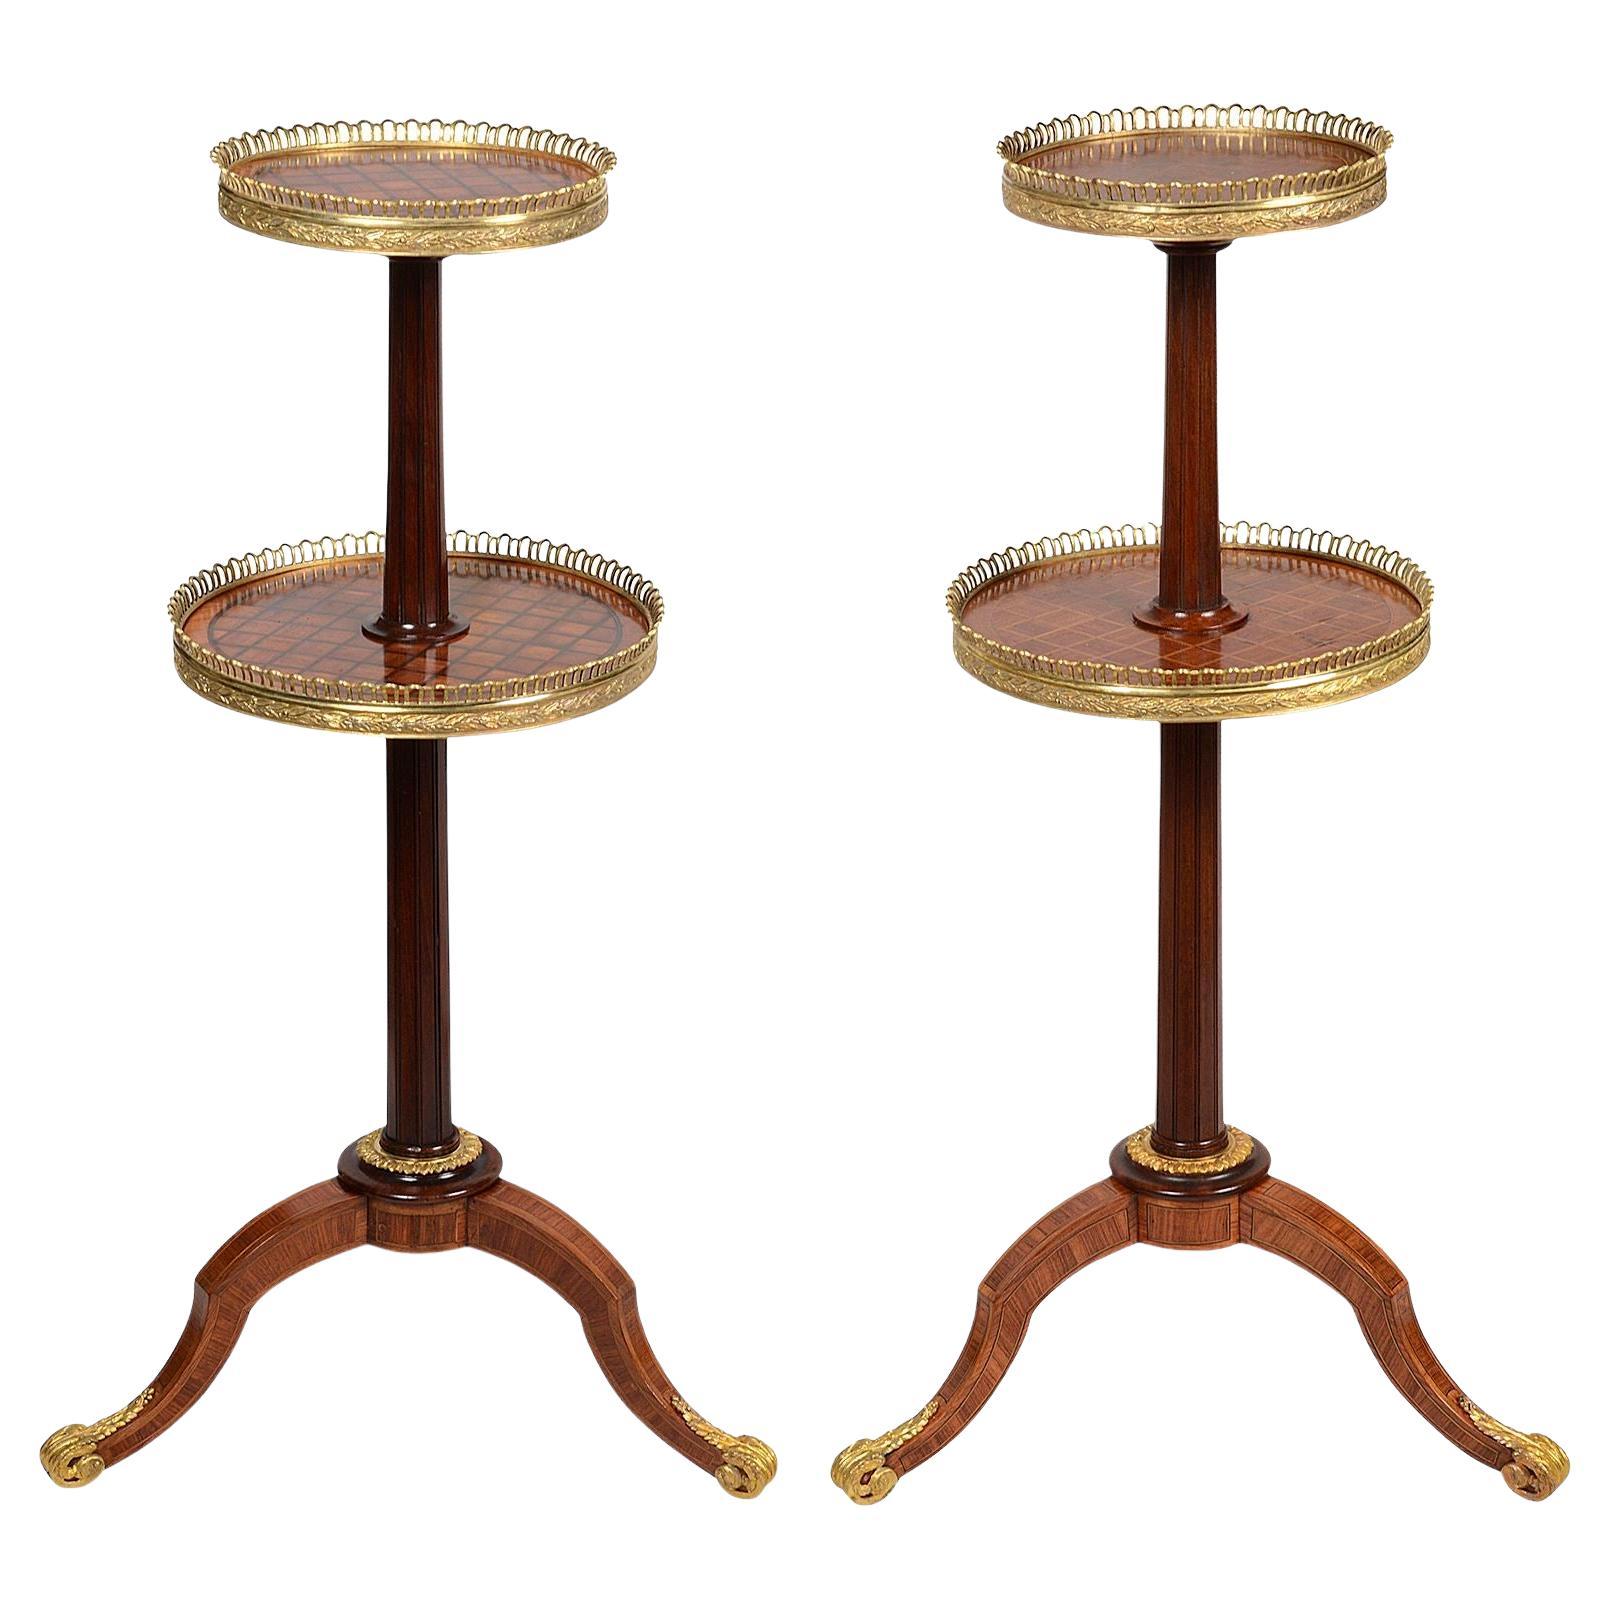 Fine Quality Pair of Two Tier Etegeres, After Donald Ross, circa 1860 For Sale